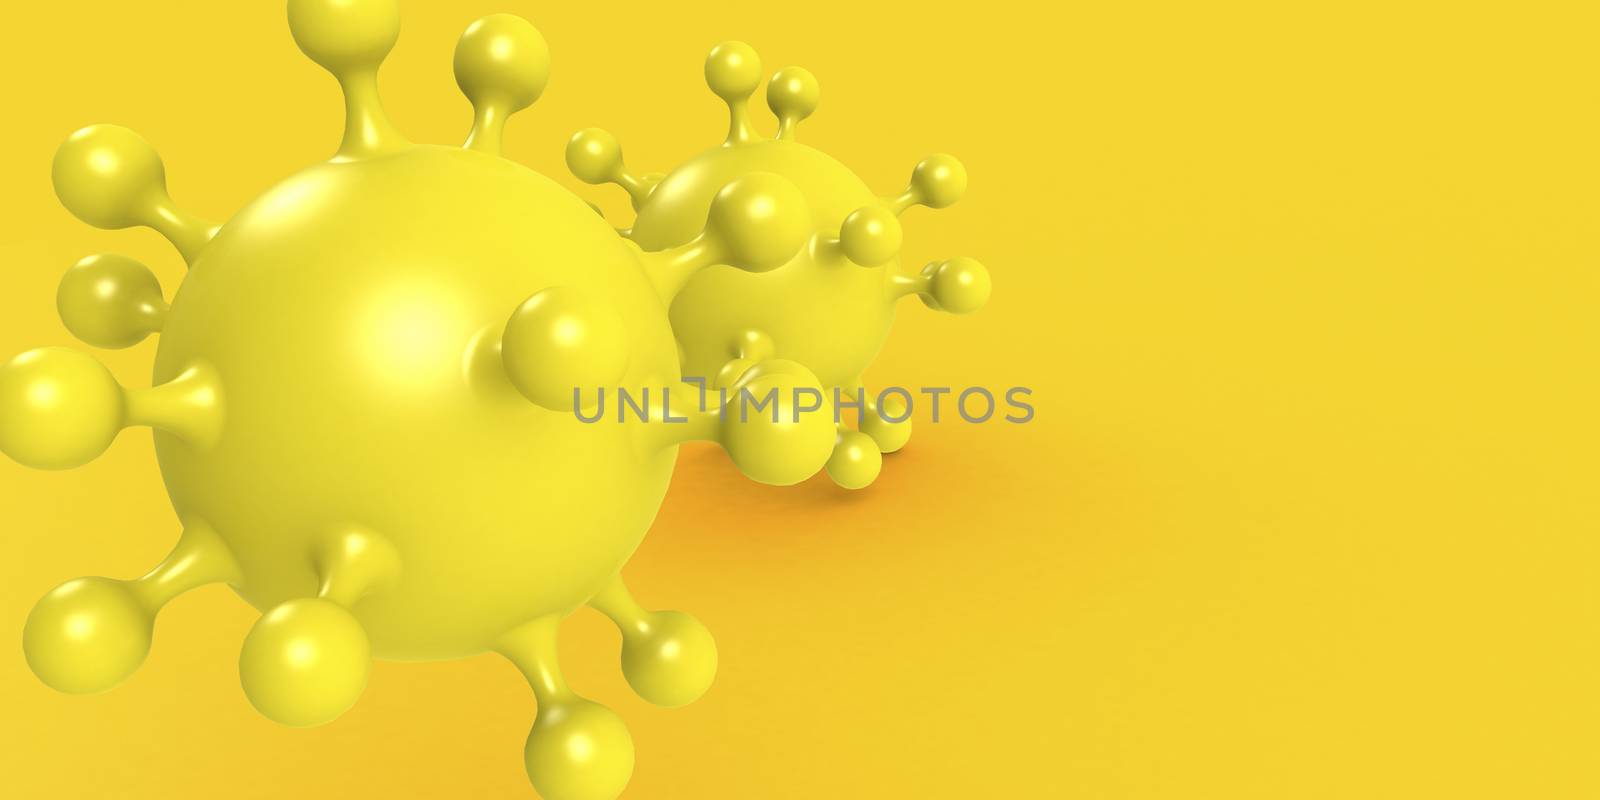 Corona virus in yellow background by tang90246